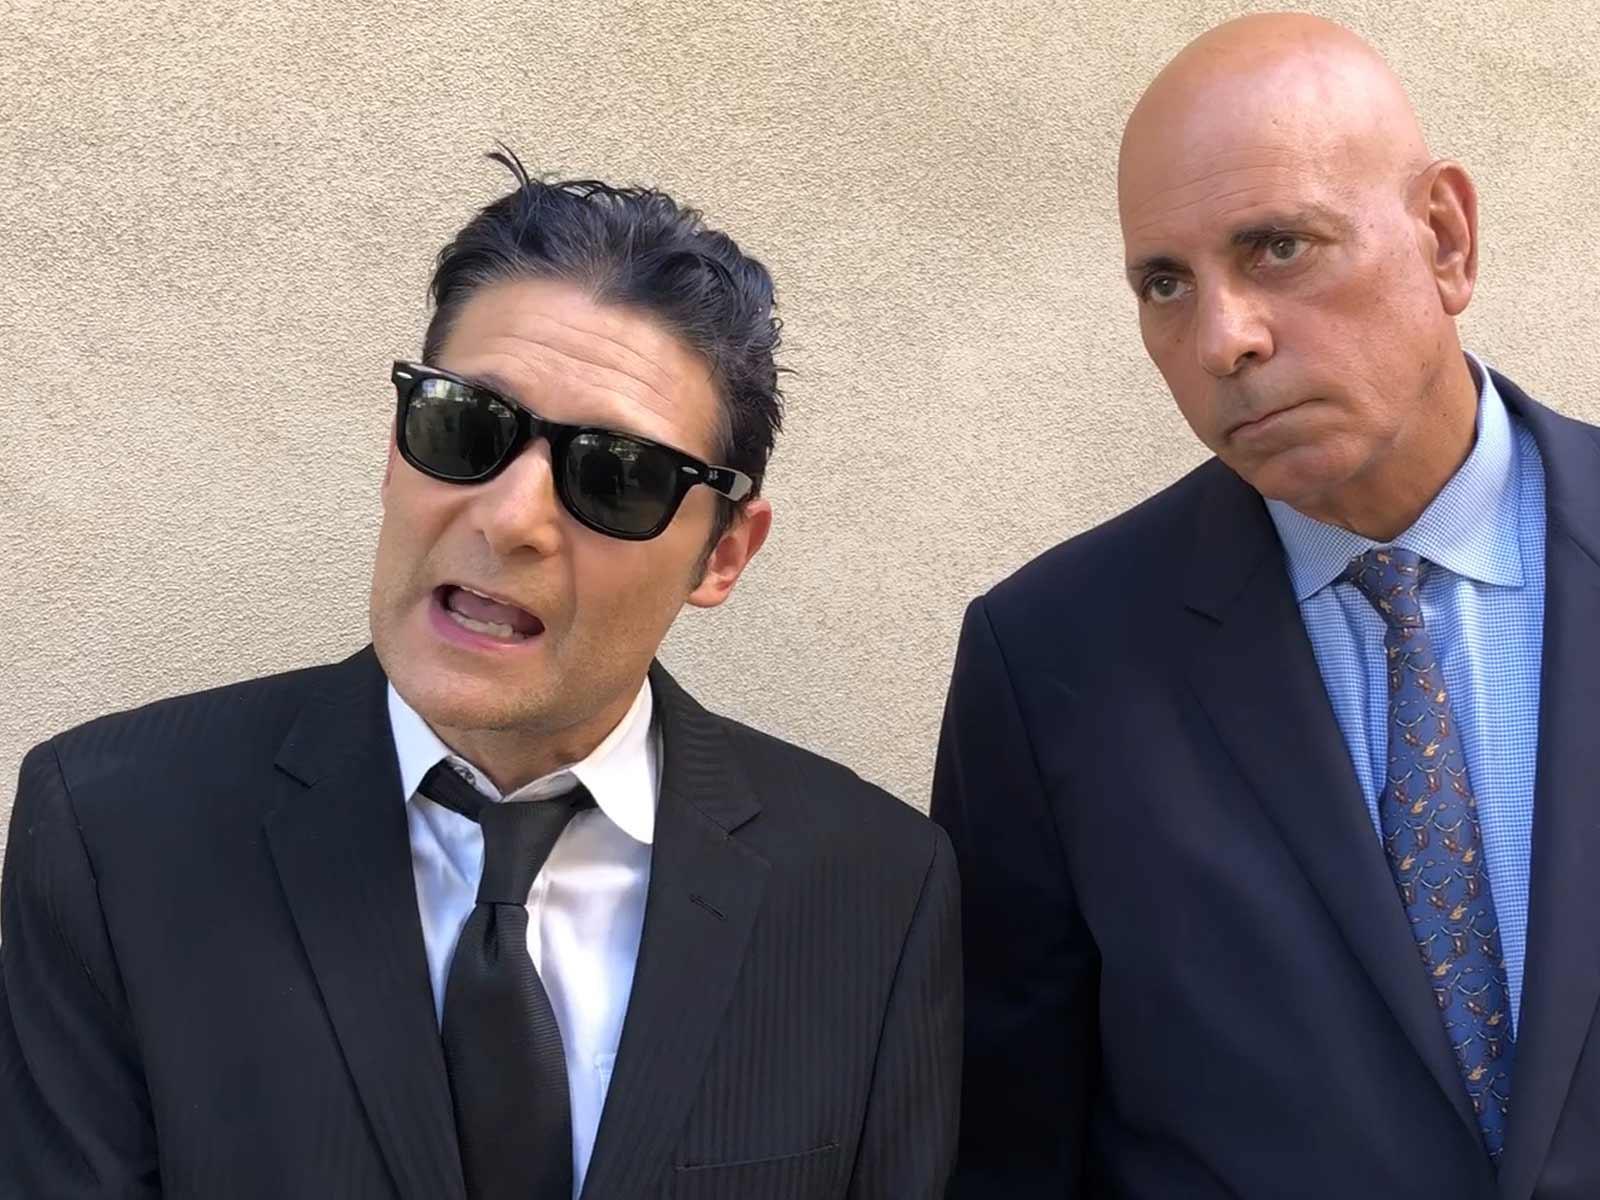 Corey Feldman Shows Up to Court and Gets Longterm Protection Against Member of ‘Wolfpack’